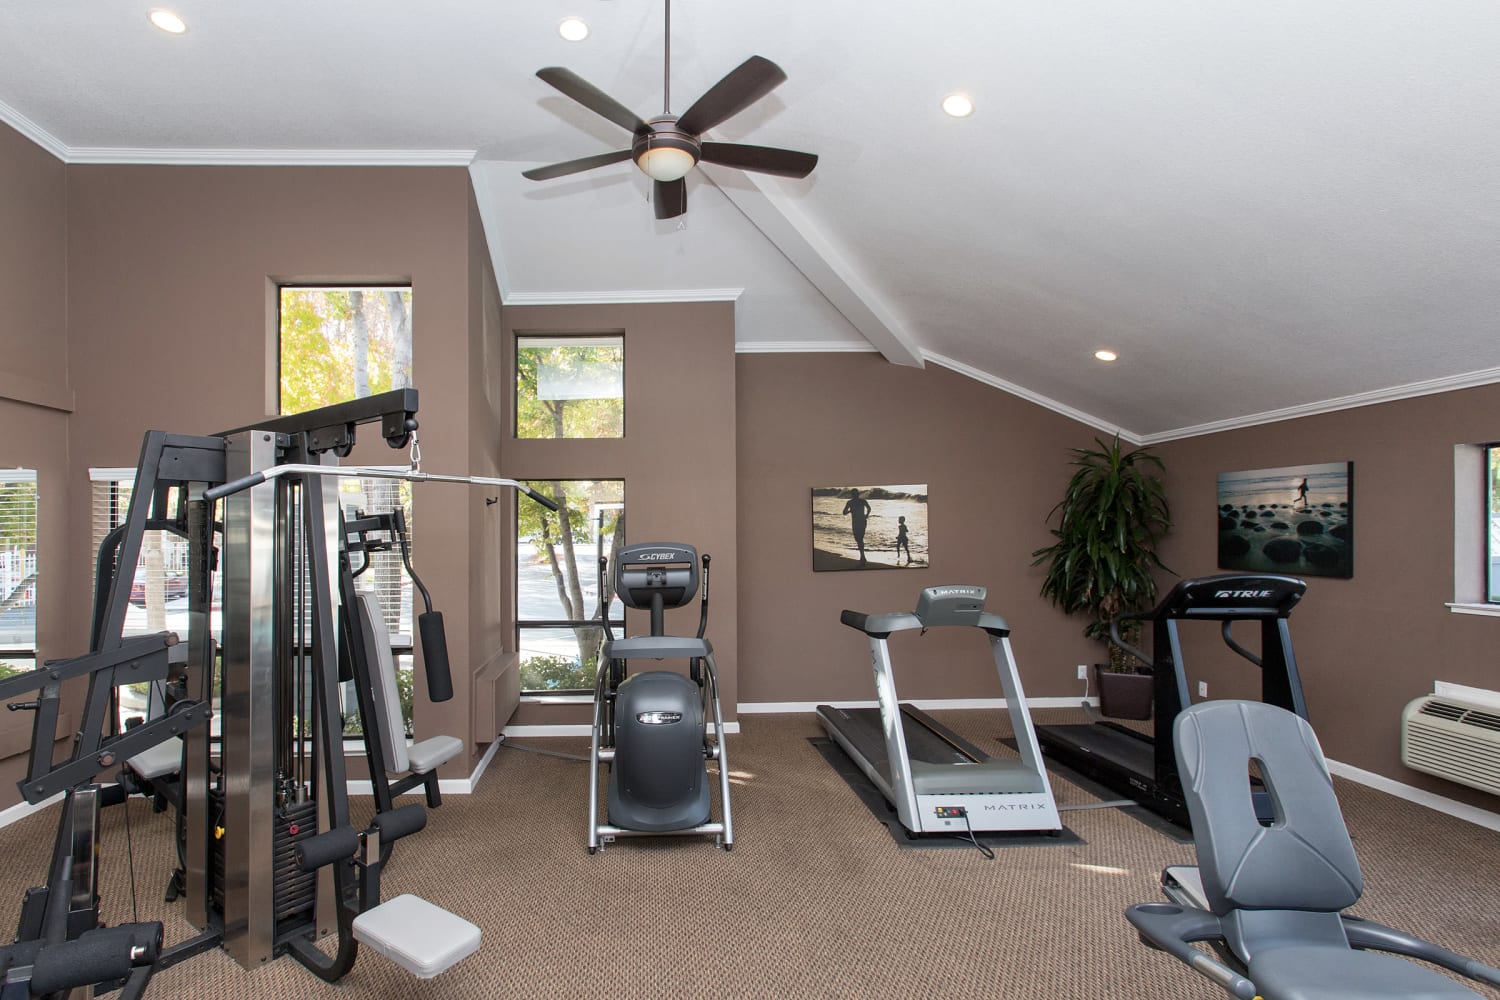 FItness center with weights in the picture at Amber Court in Fremont, California